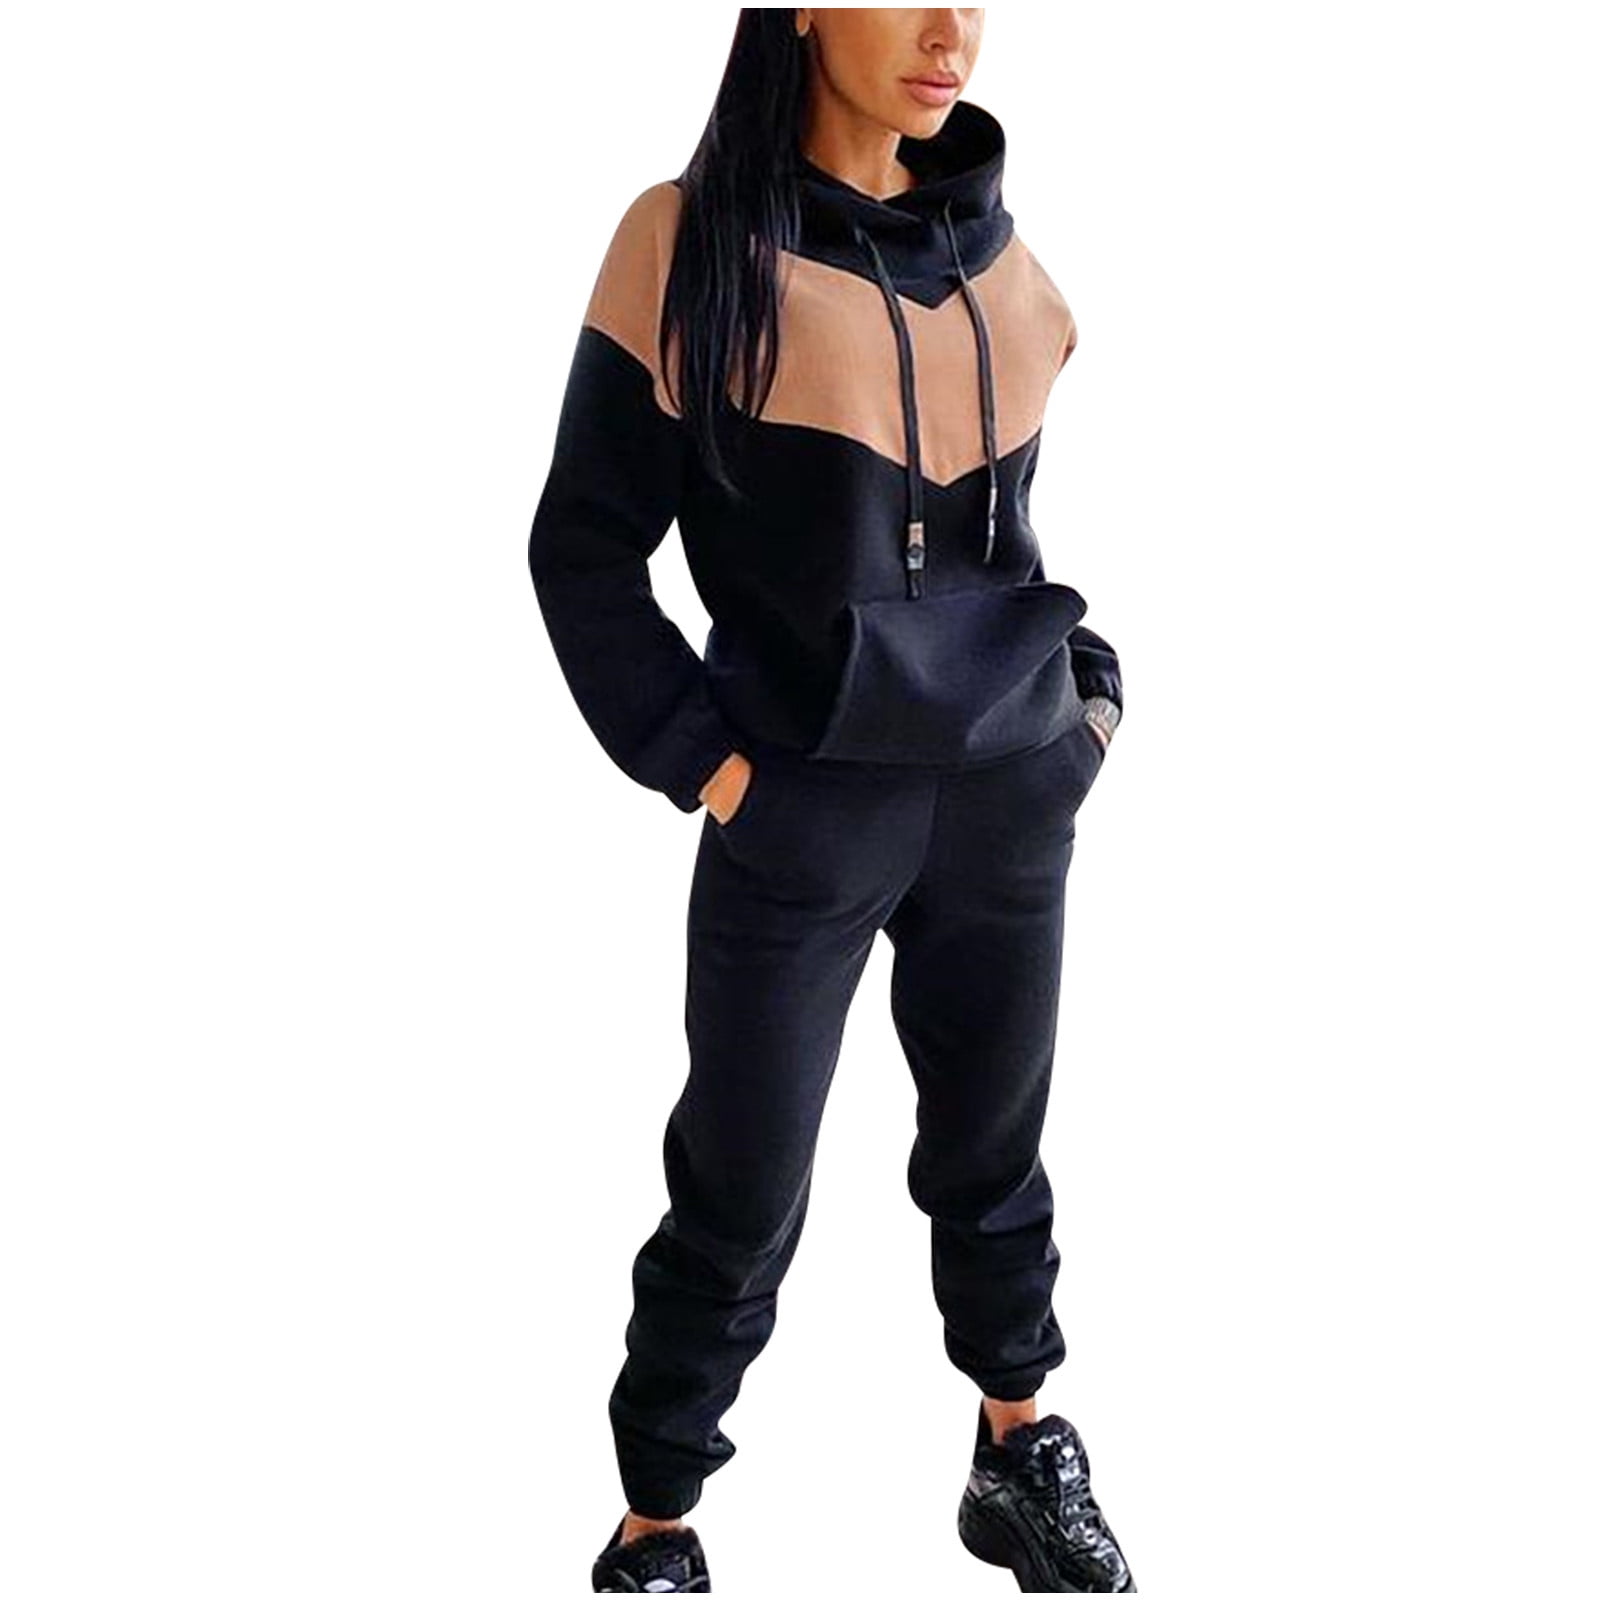 RQYYD Women's Jogging Suits Sets Hoodies Tracksuit Long Sleeve Drawstring  Sweatshirts and Sweatpant 2 Piece Color Block Sport Pullover Sweatsuit  Green